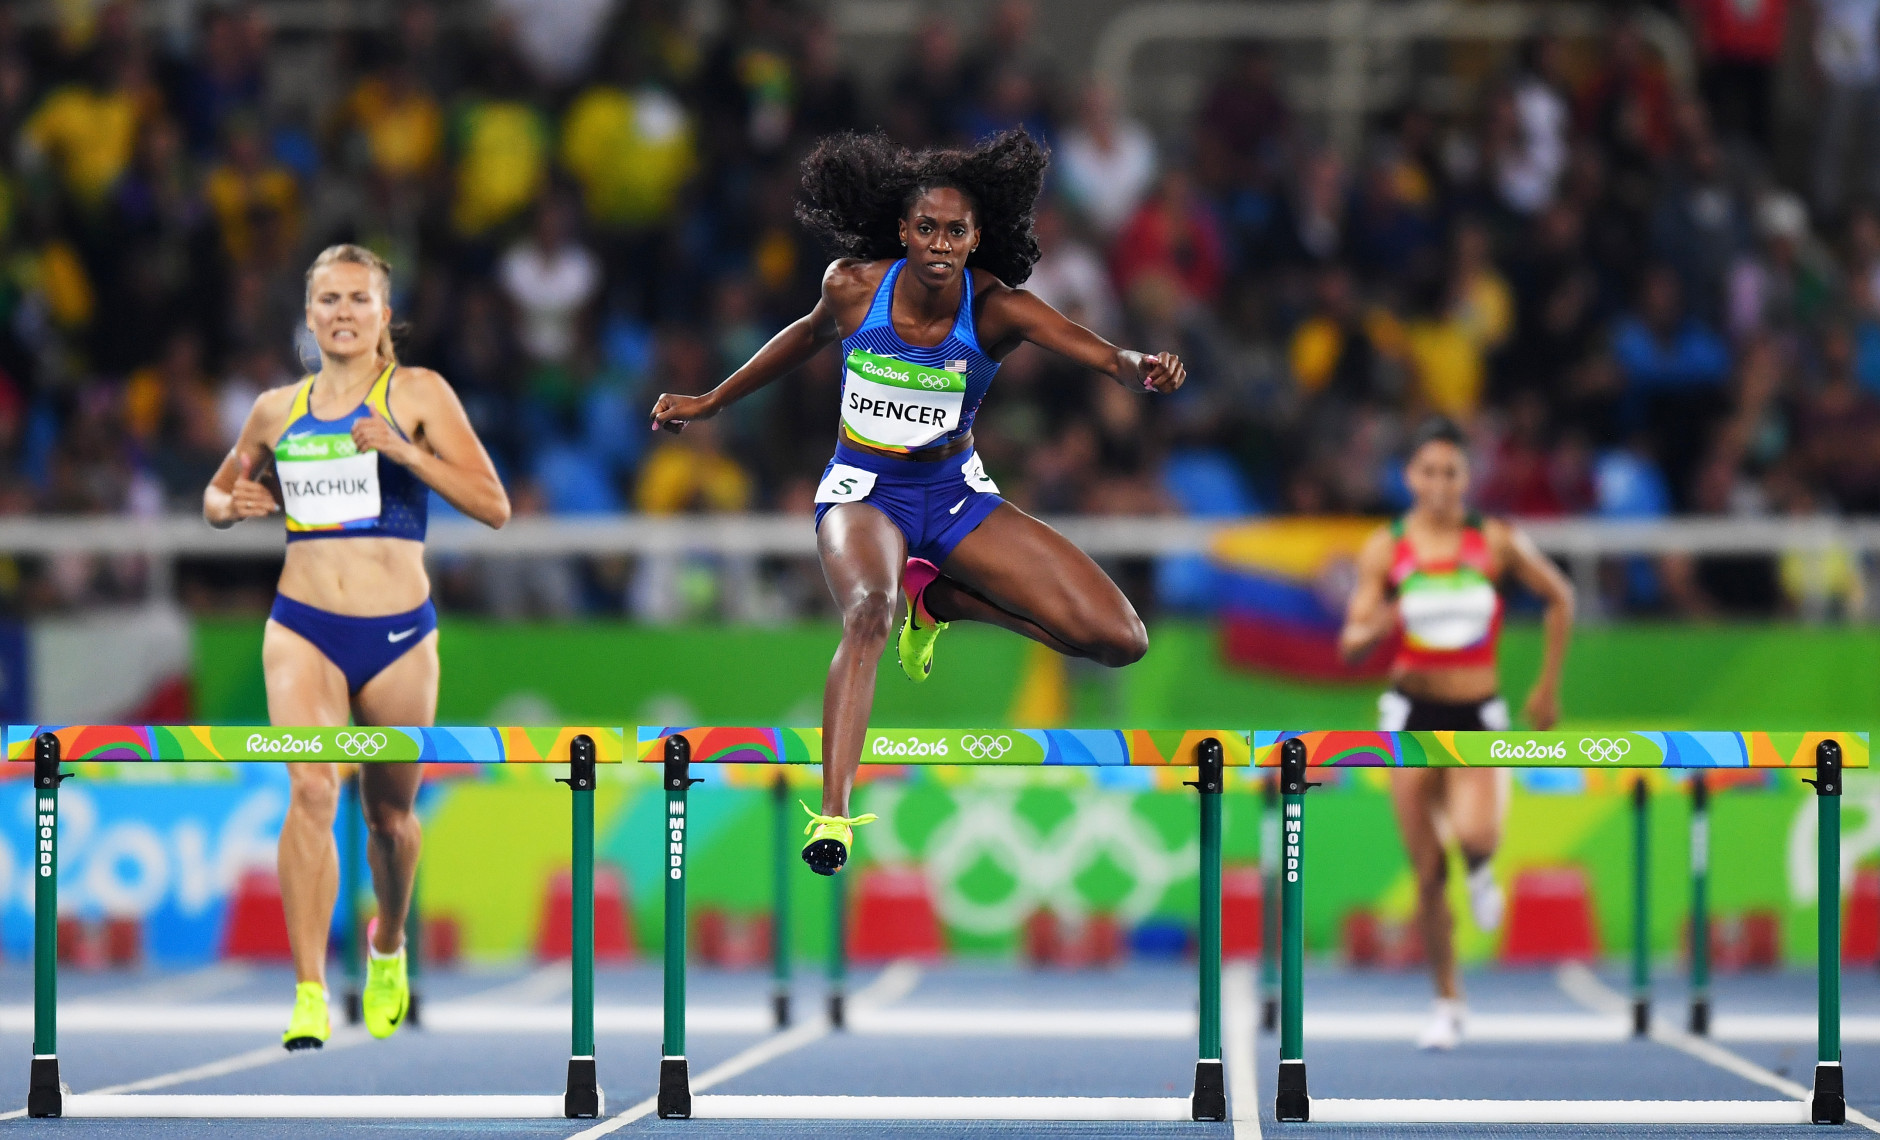 RIO DE JANEIRO, BRAZIL - AUGUST 15:  Ashley Spencer of the United States (C) competes in the Women's 400m Hurdles Round 1 - Heat 3 on Day 10 of the Rio 2016 Olympic Games at the Olympic Stadium on August 15, 2016 in Rio de Janeiro, Brazil.  (Photo by Quinn Rooney/Getty Images)